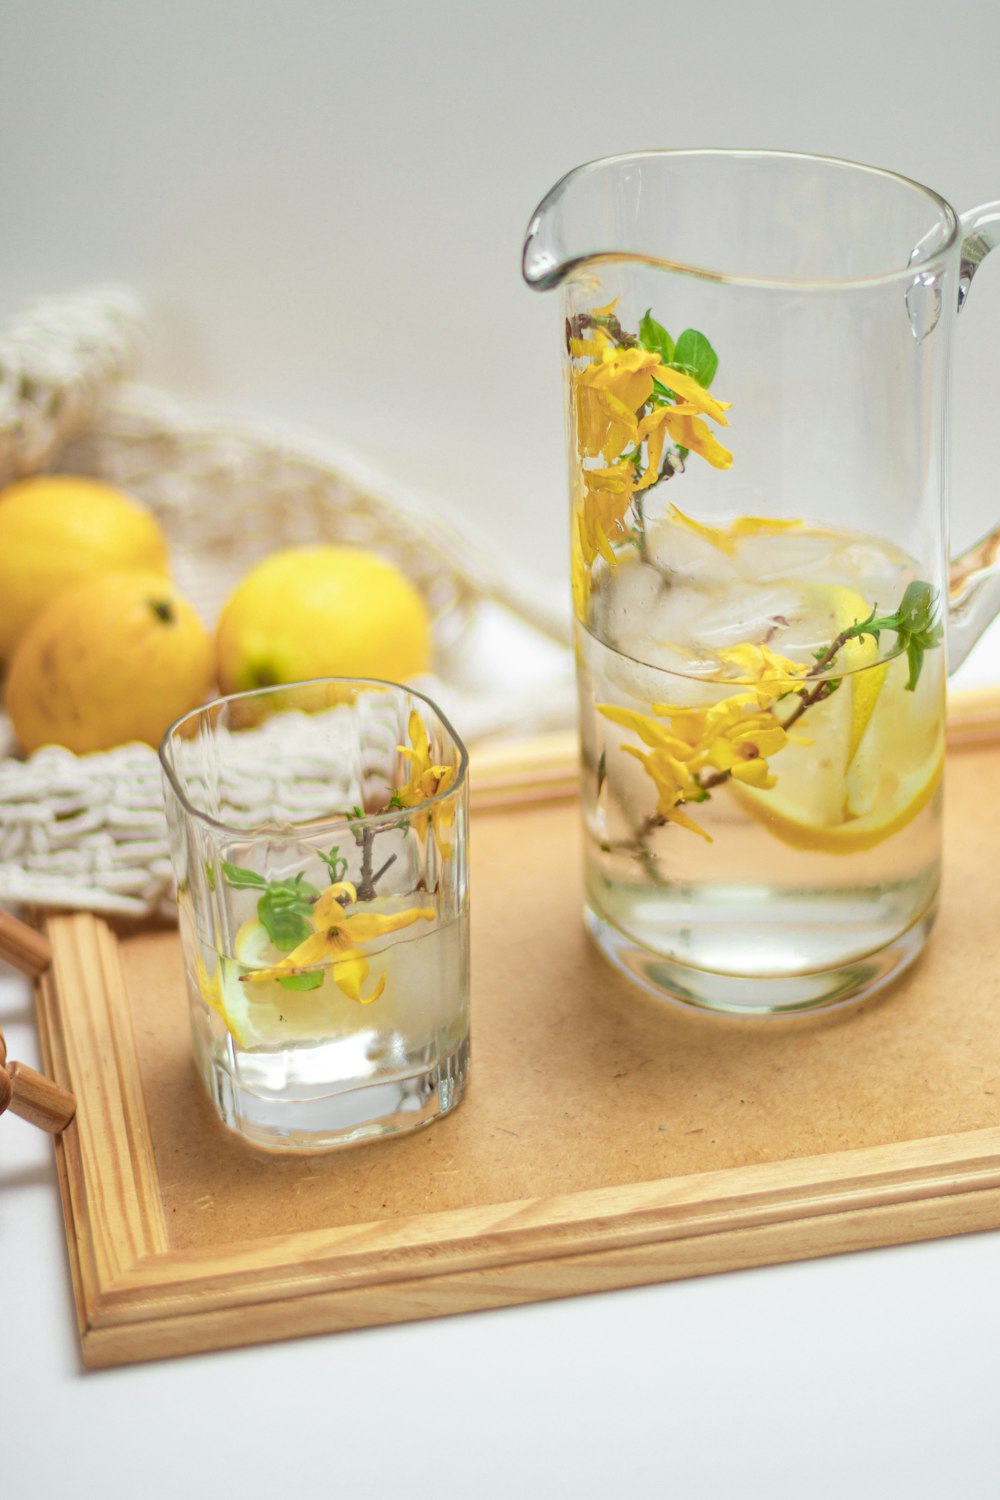 a pitcher of lemonade and a glass of water on a tray